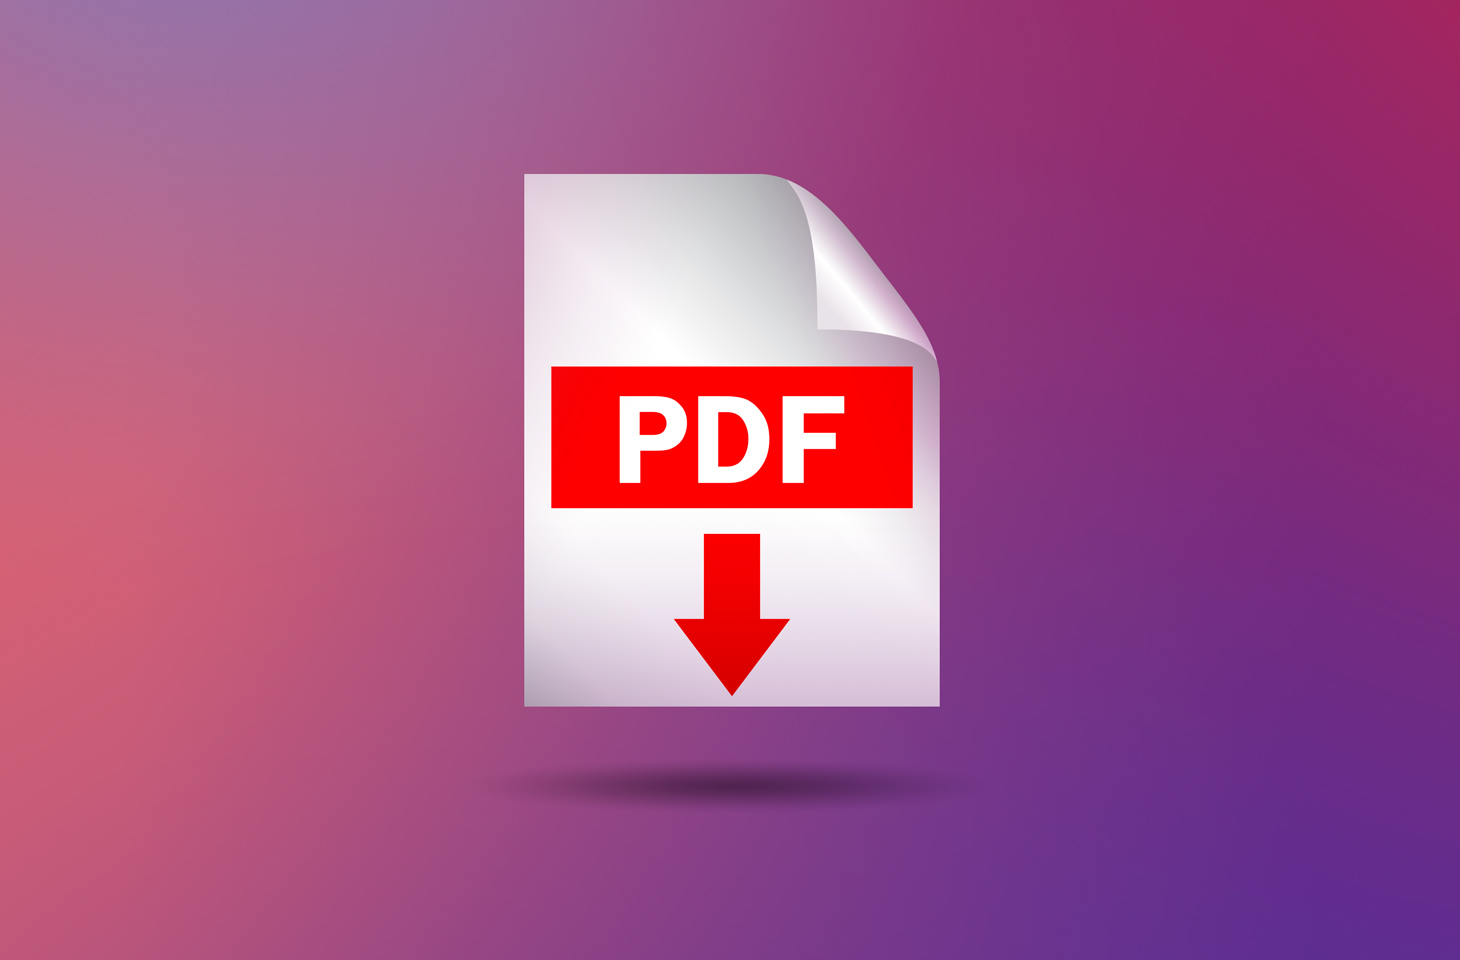 How to Crop a PDF